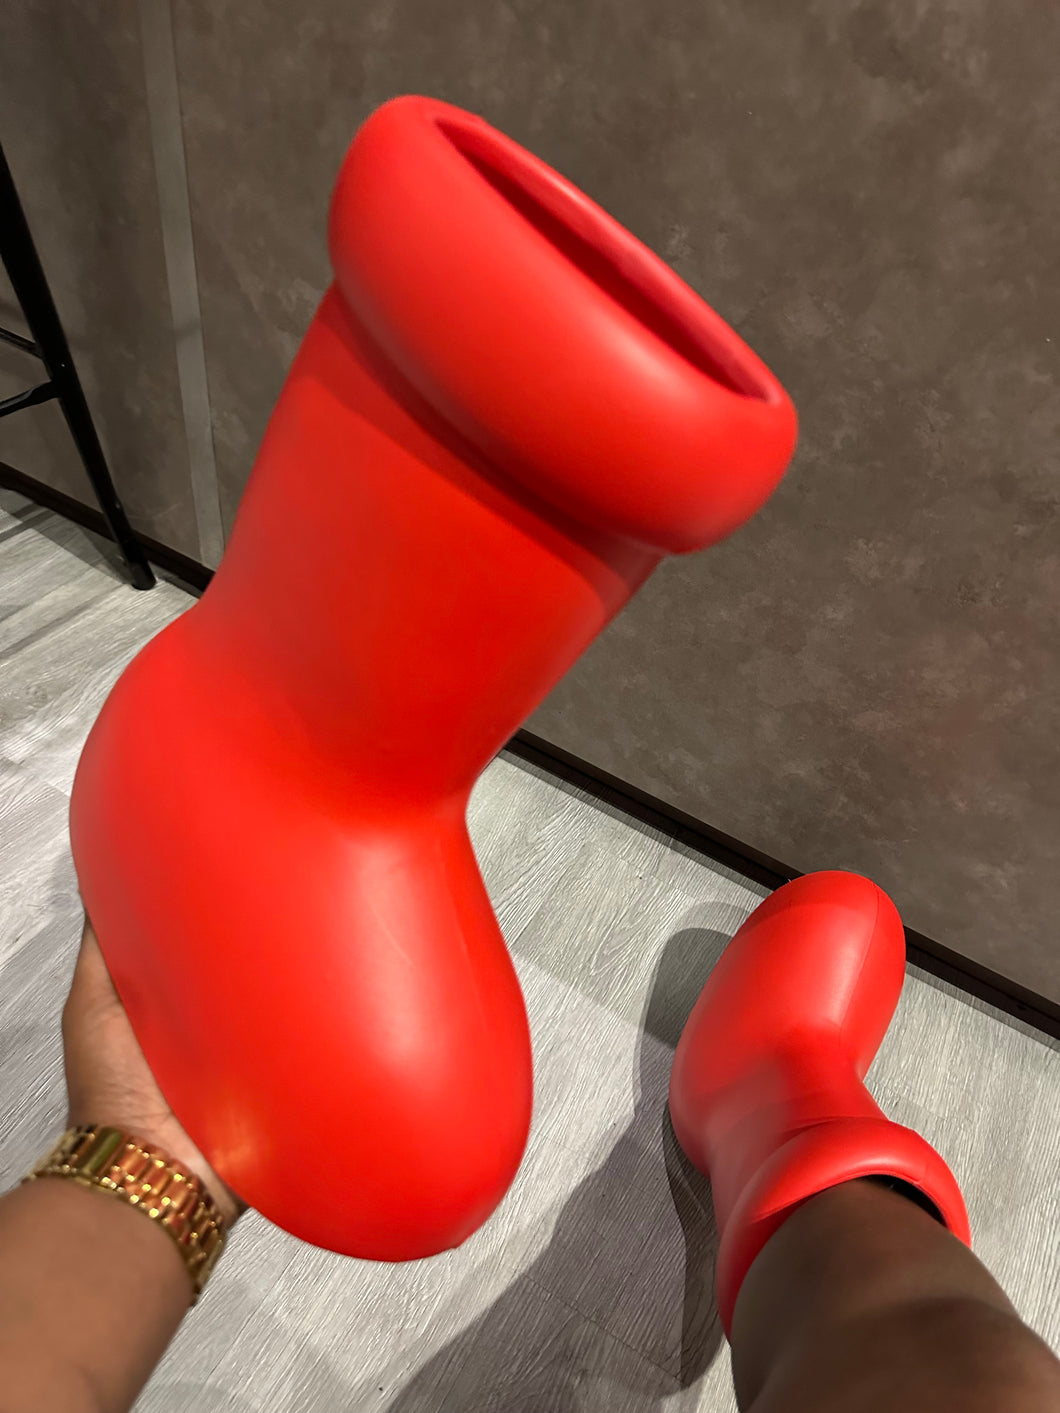 Toy Red Boots